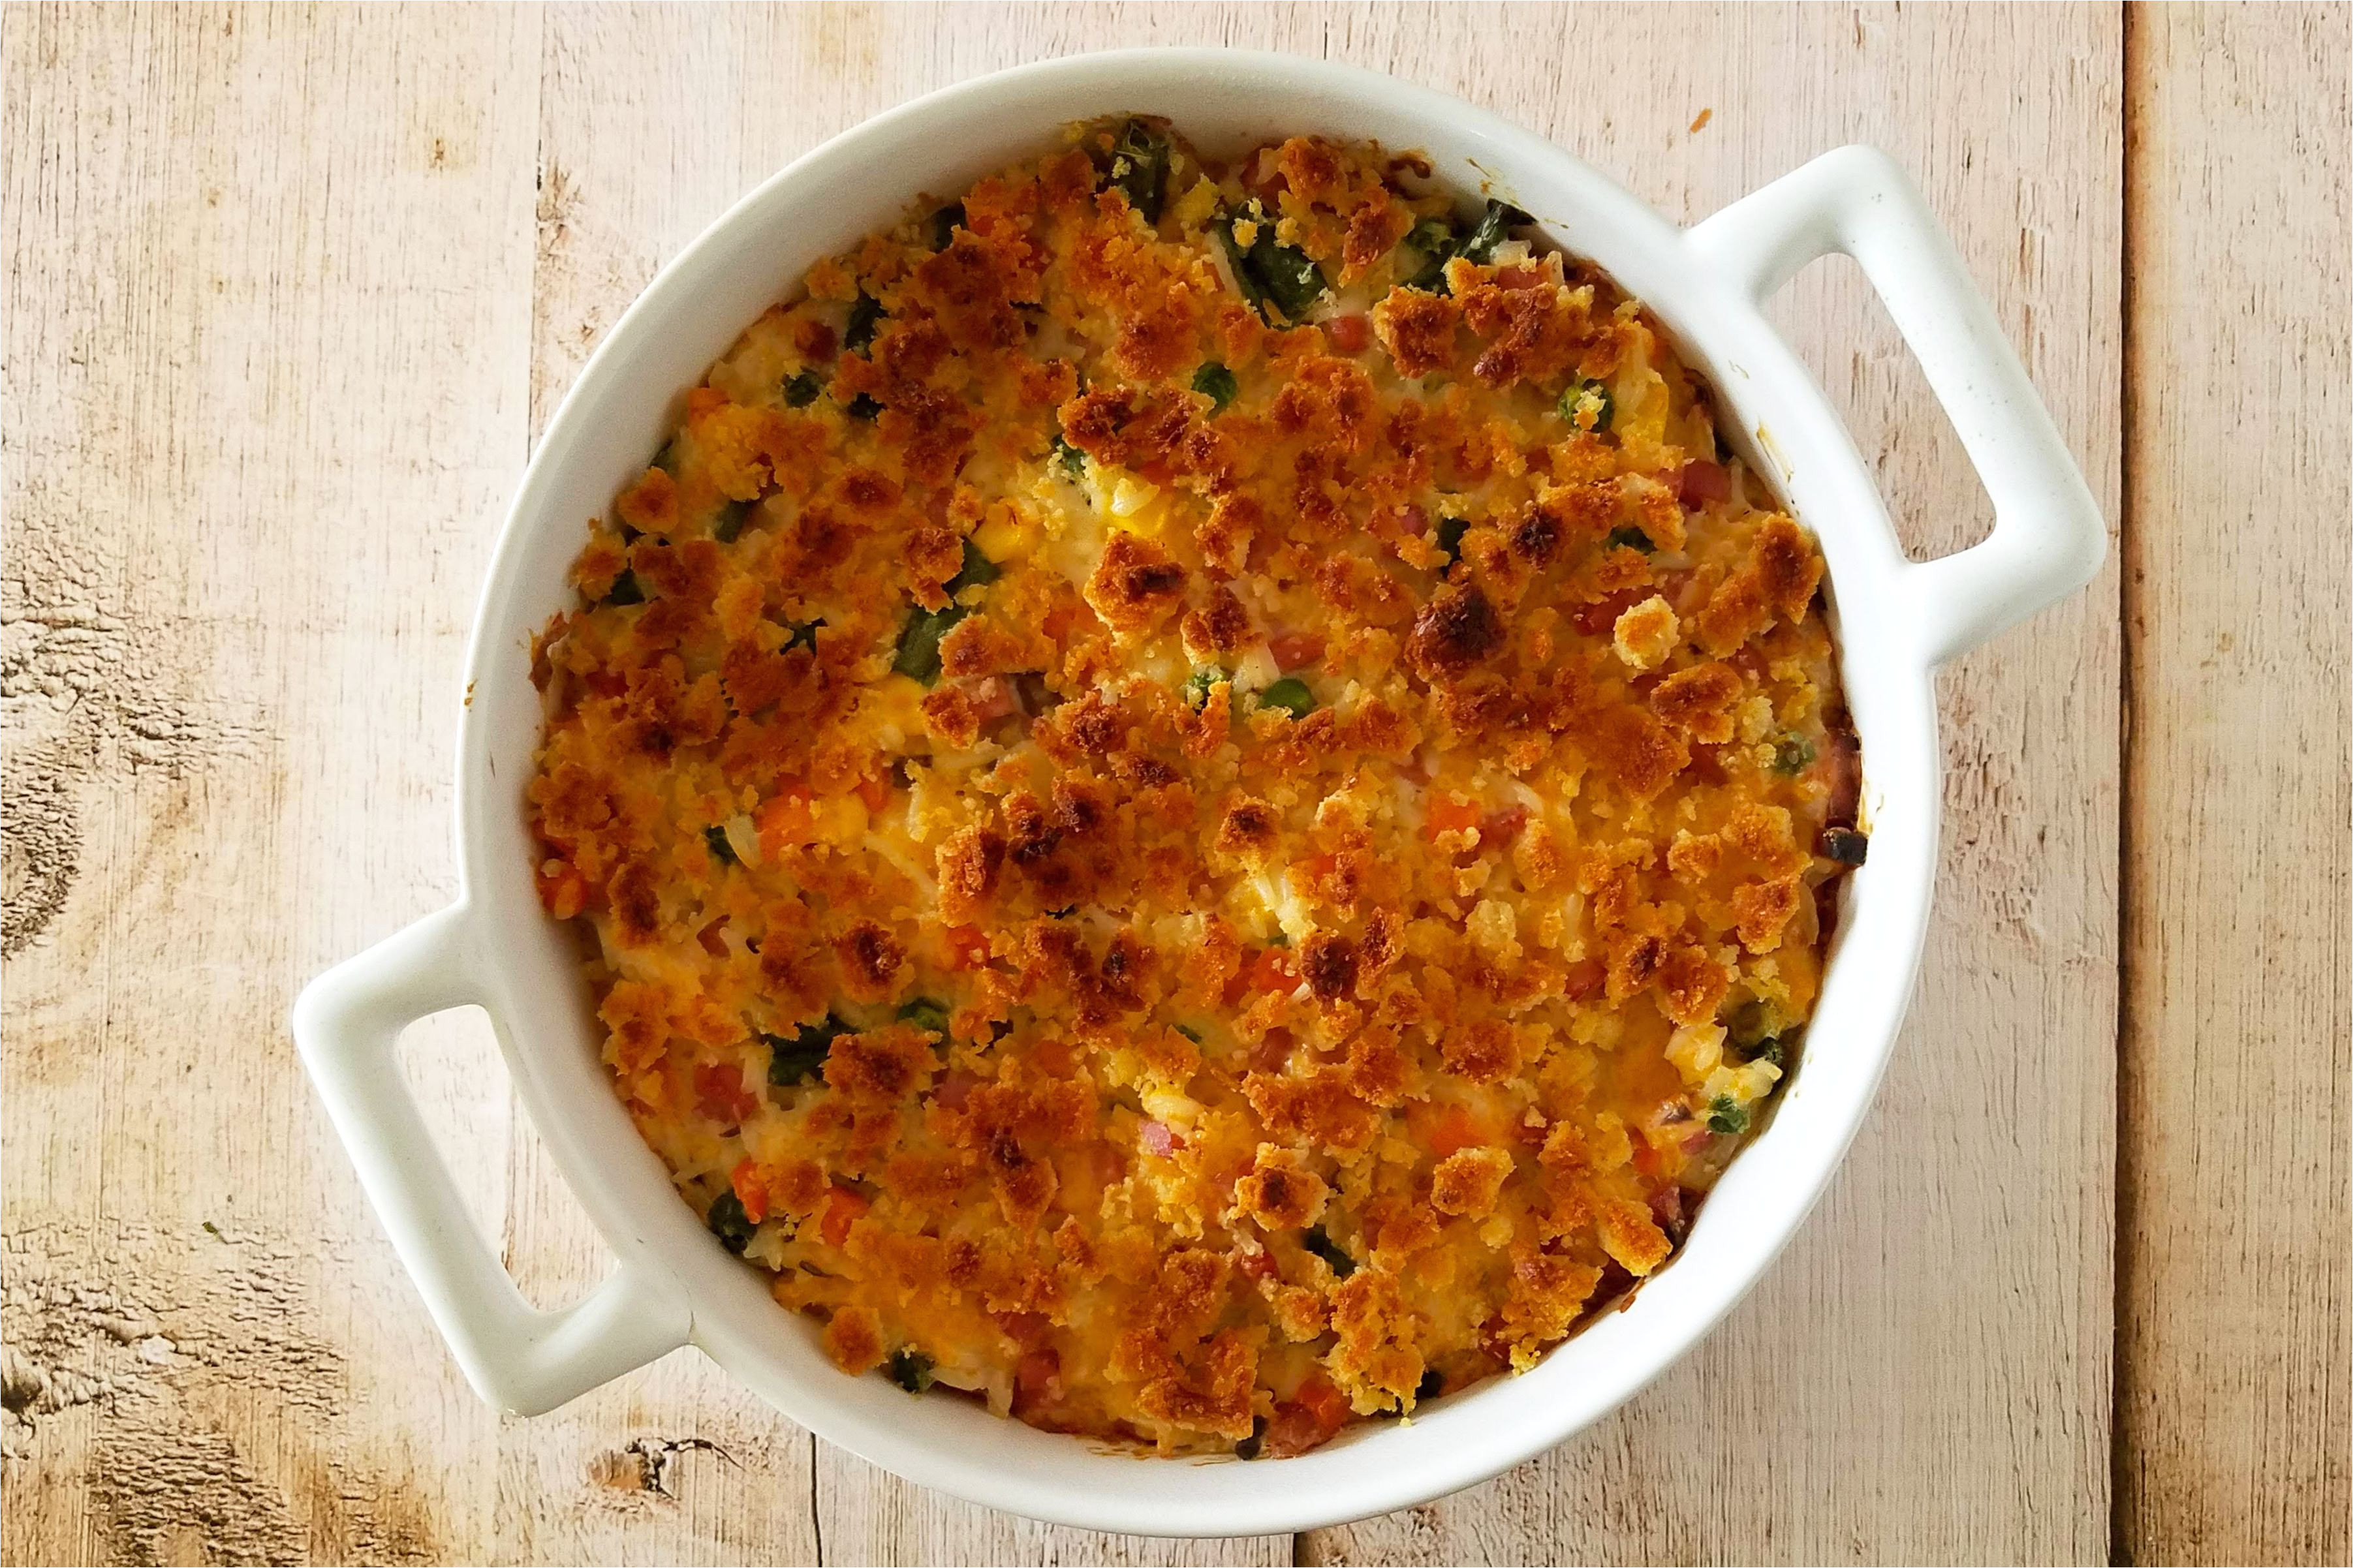 ham and rice bake with cheese and vegetables 3057447 final 5c253cc3c9e77c00015fe00c jpg